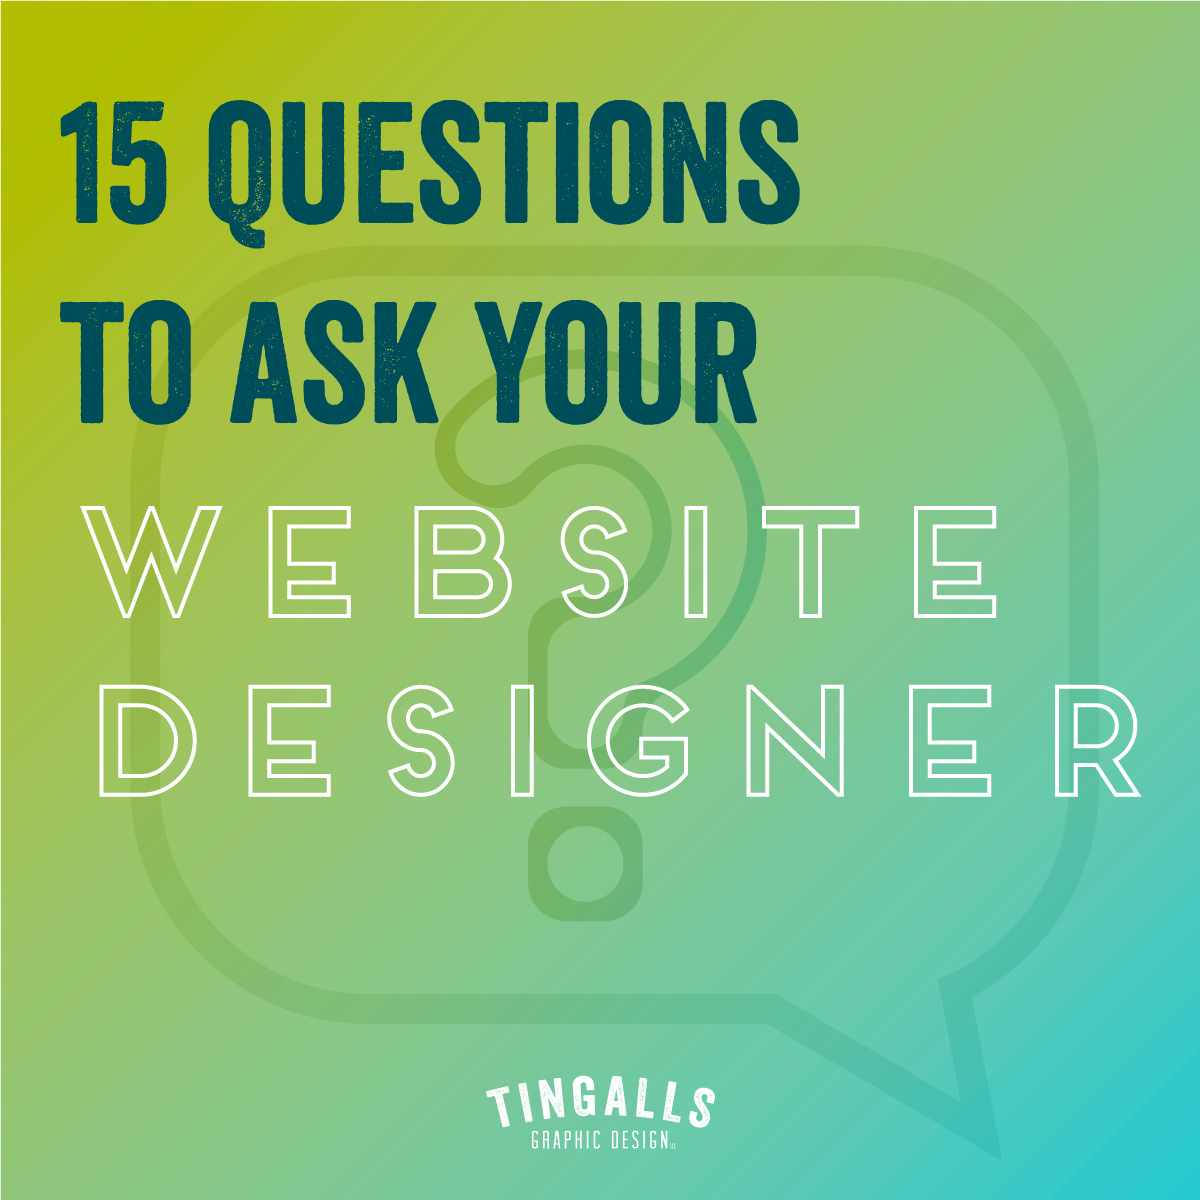 15 questions to ask your website designer